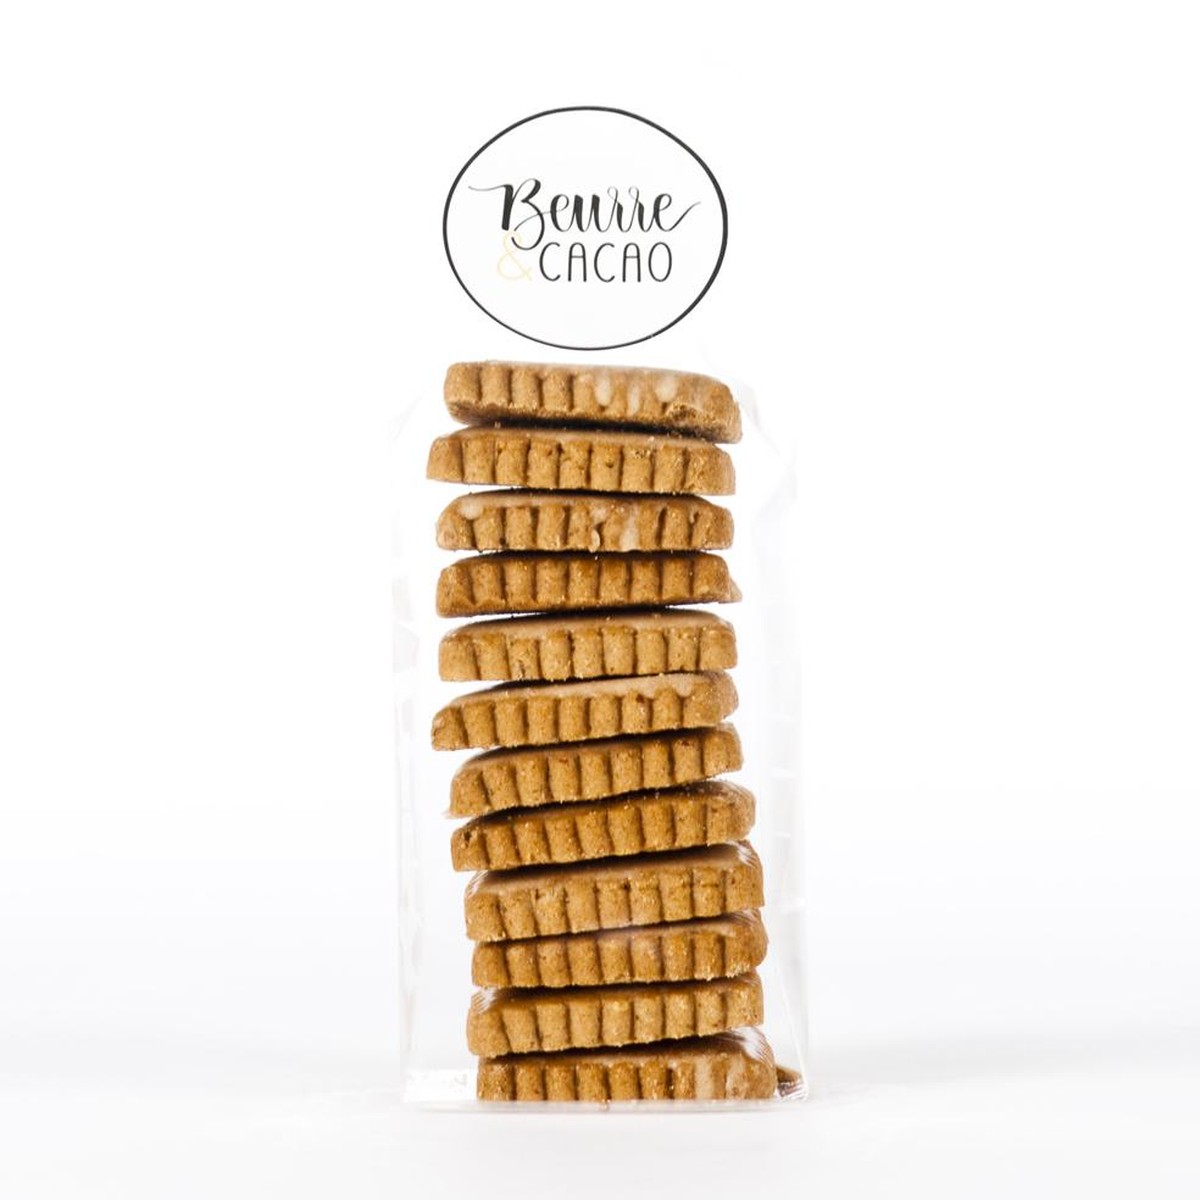 Beurre & Cacao  Biscuits Cannelle & Amandes  125gr